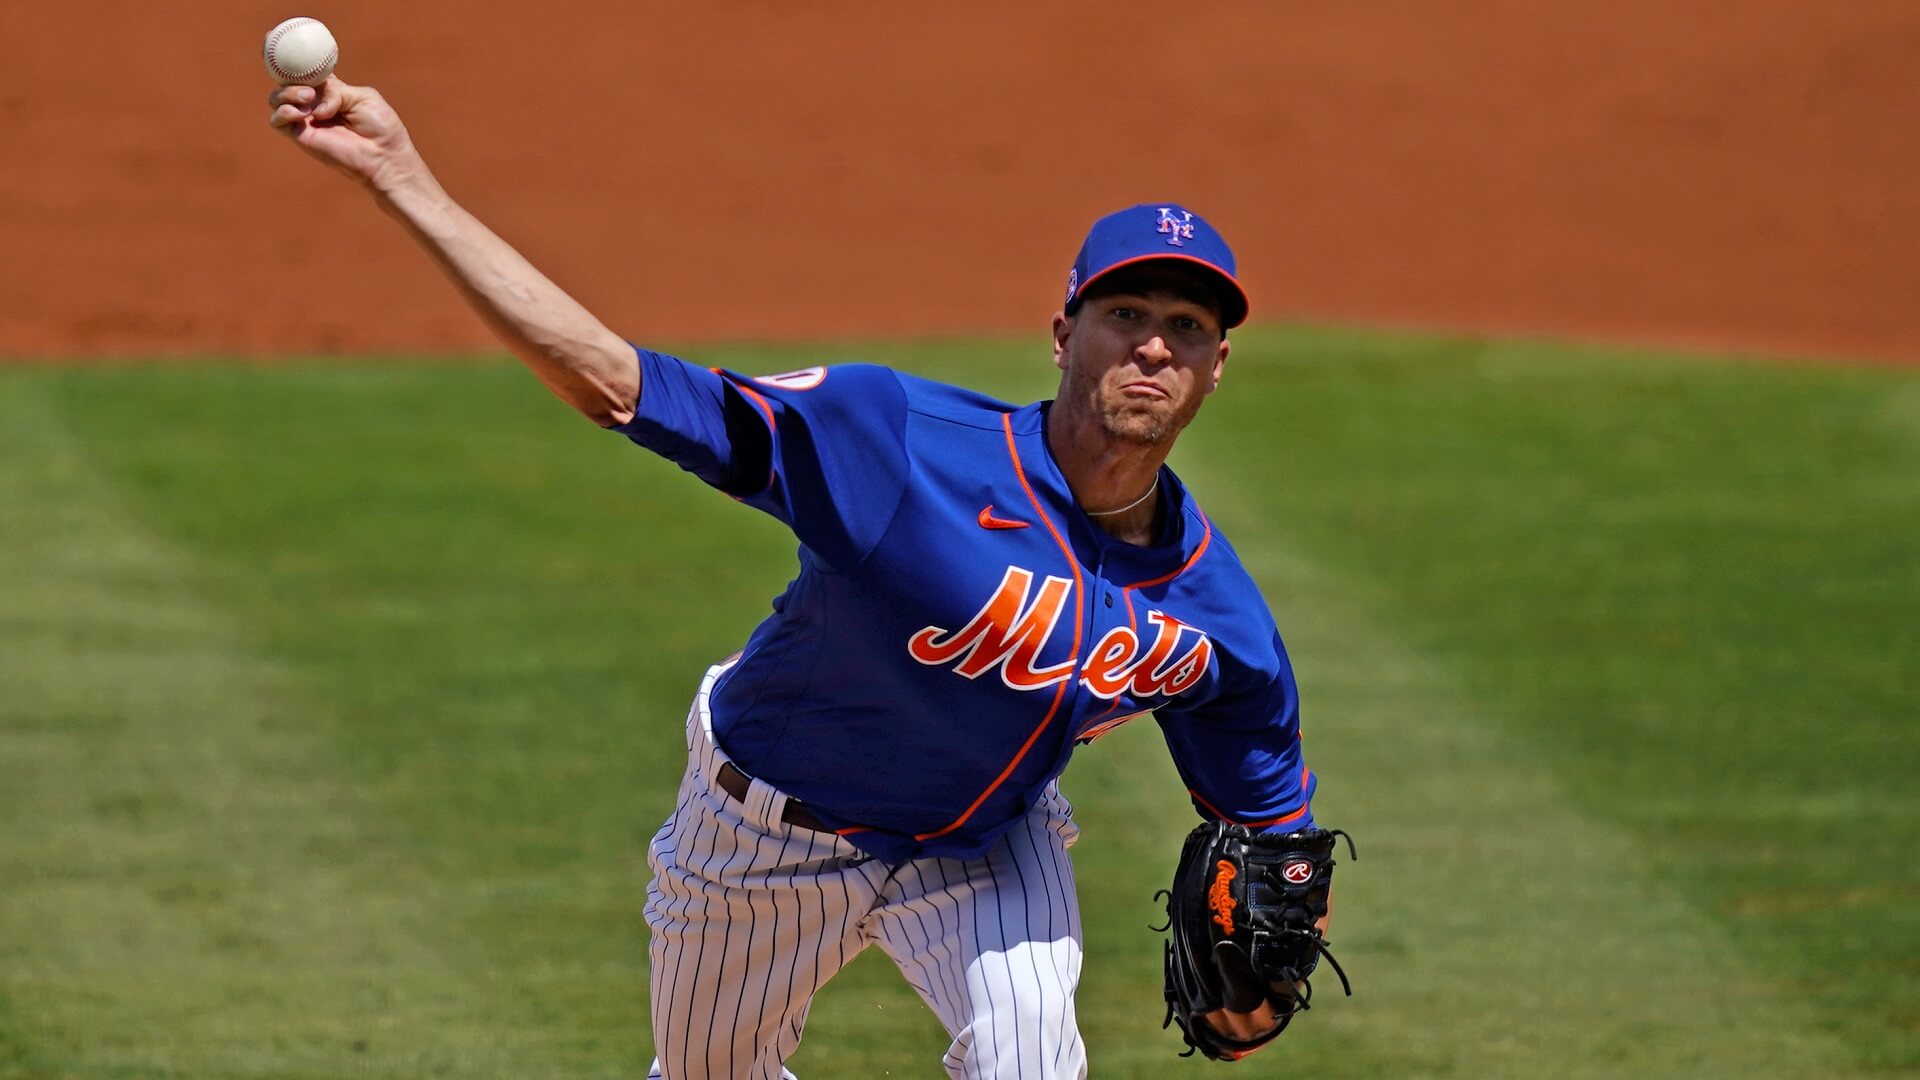 SNY] Jacob deGrom will not pitch in another game this season. Here are the  unbelievable pitching numbers he put up before getting injured. : r/baseball